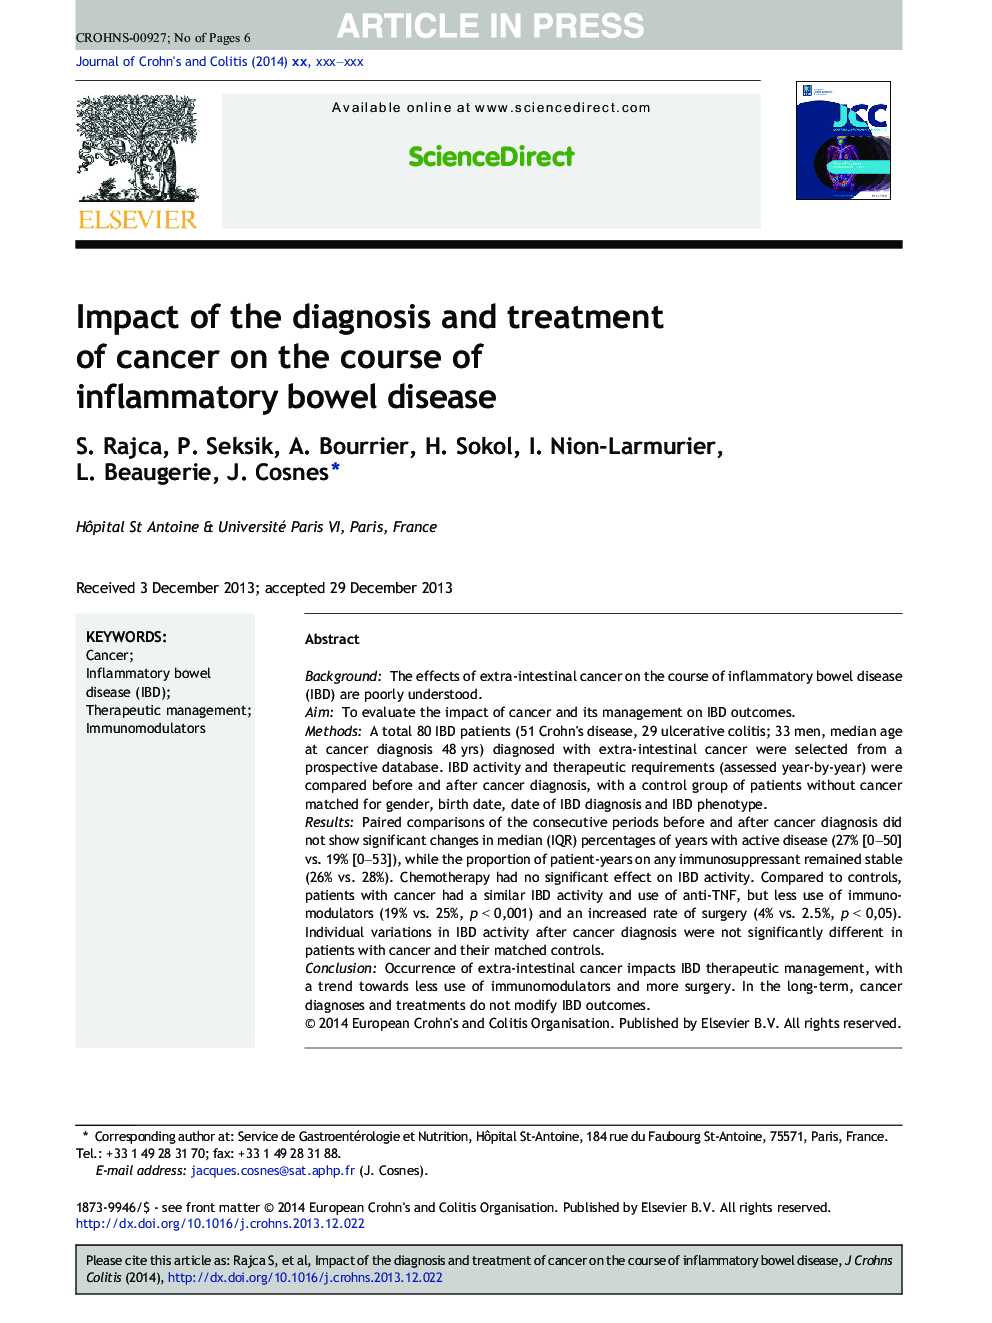 Impact of the diagnosis and treatment of cancer on the course of inflammatory bowel disease